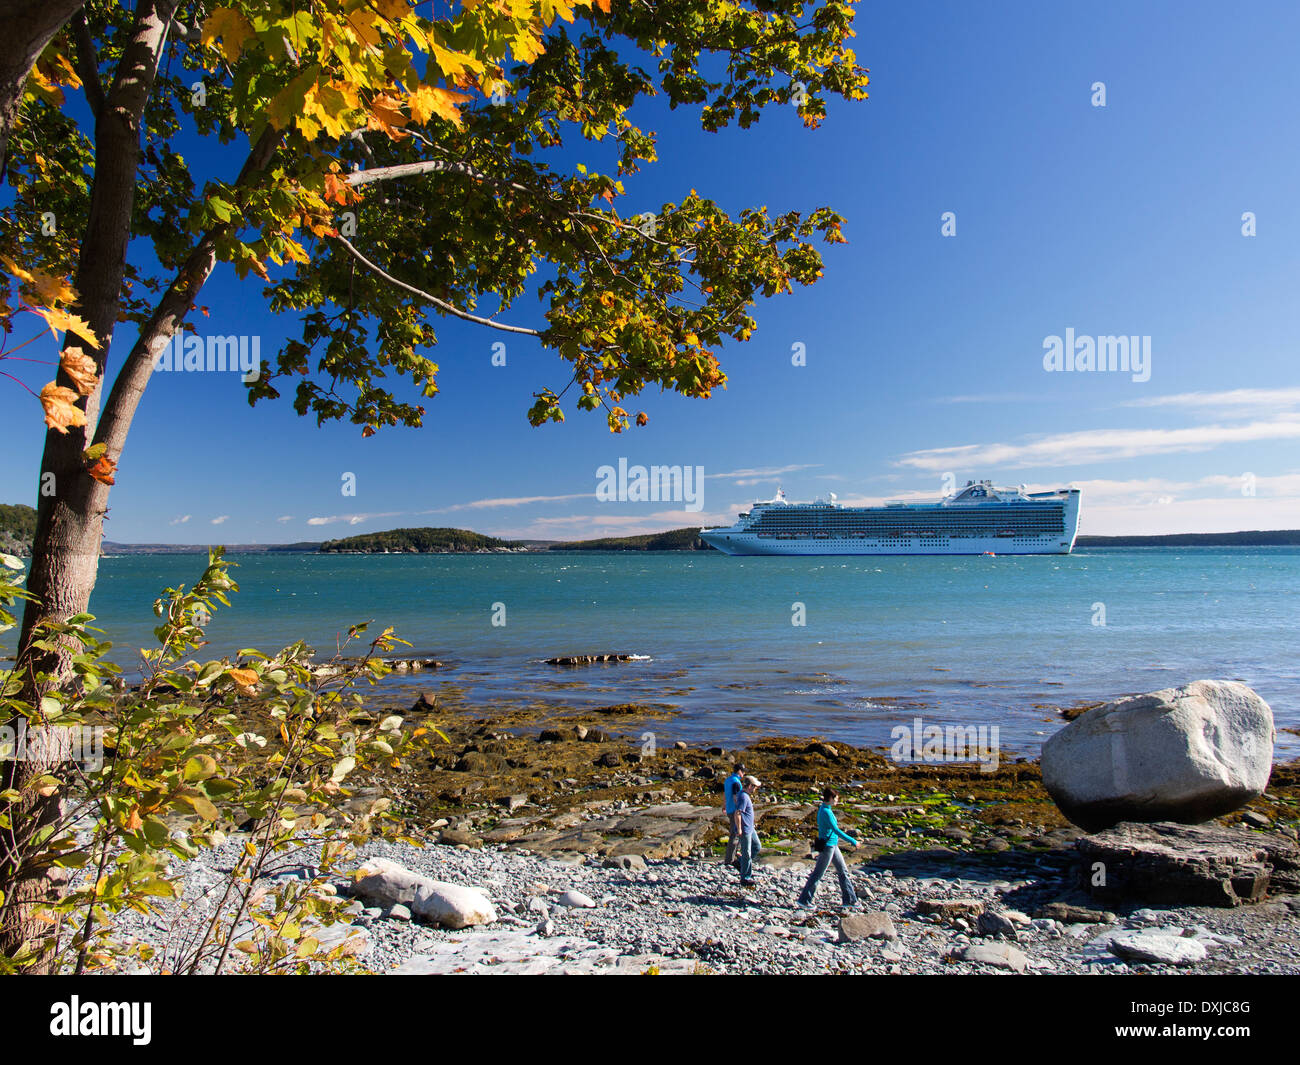 Cruise Liner Caribbean Princess moored off Bar Harbour Maine USA 5 Stock Photo